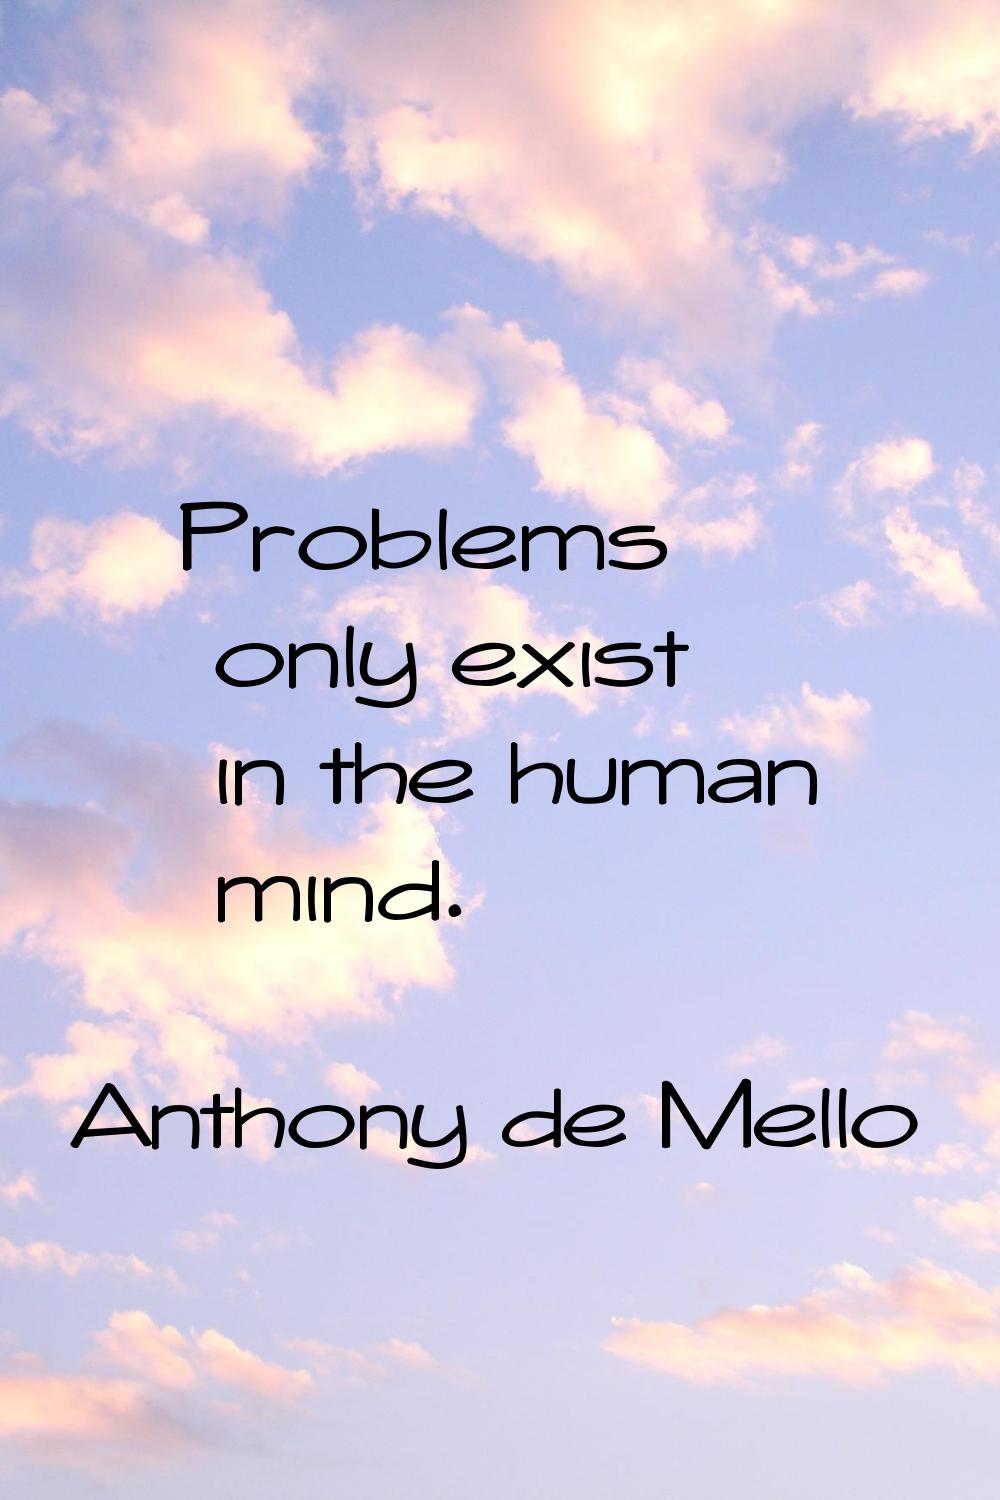 Problems only exist in the human mind.